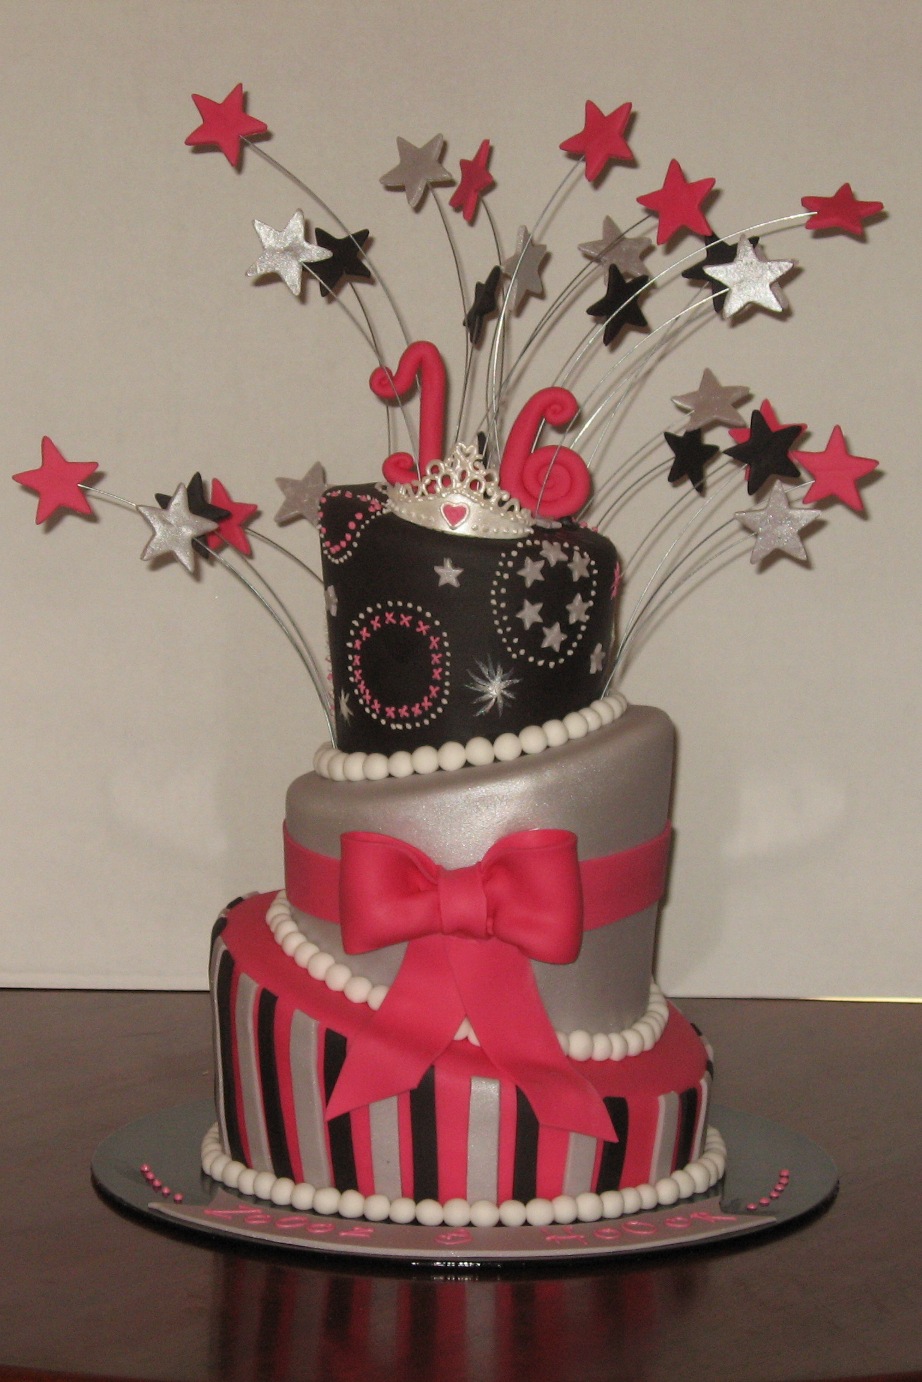 Let Them Eat Cake: The Twins 16th Birthday cake